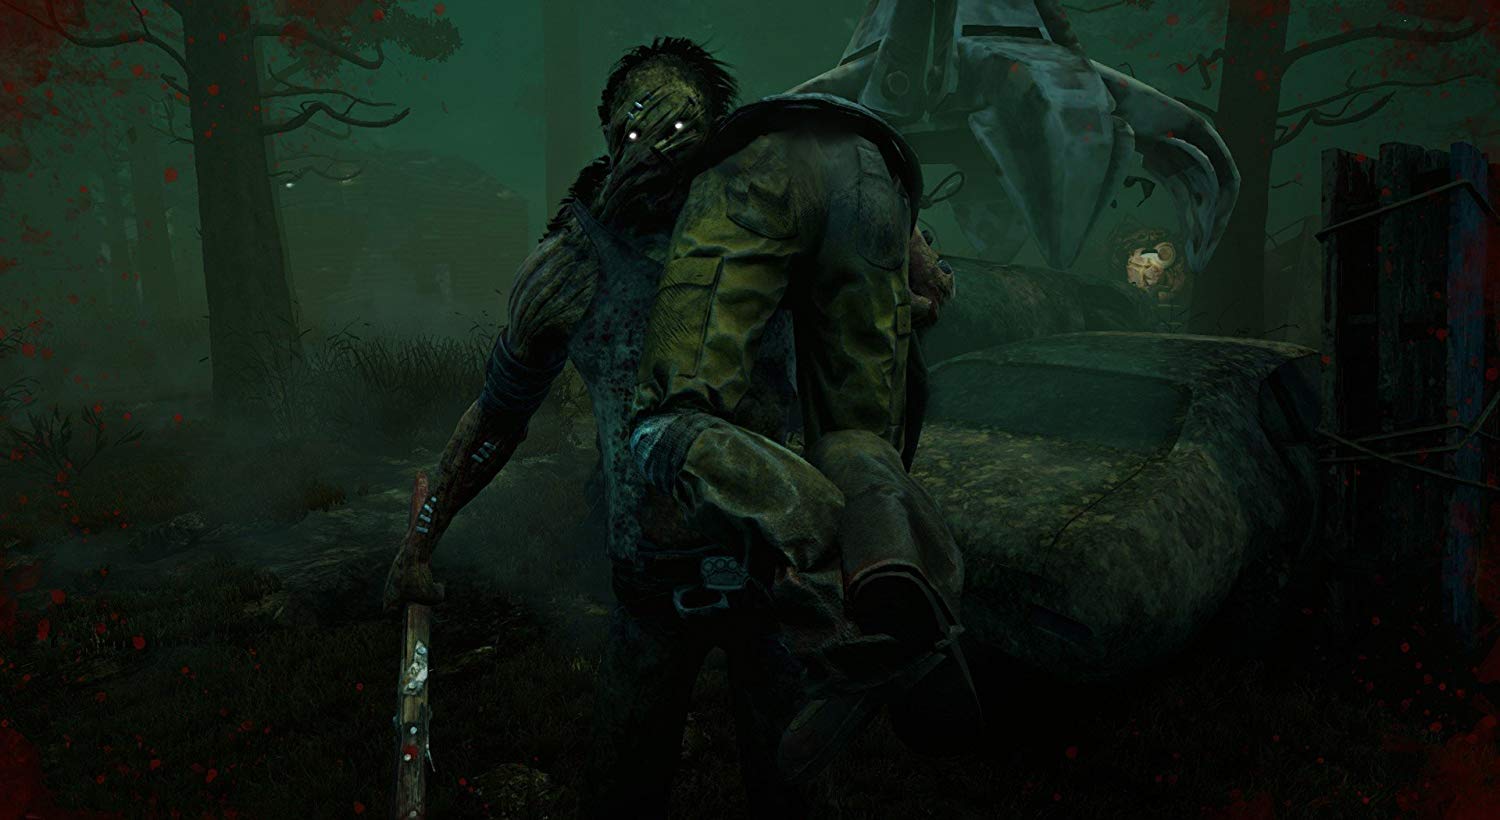 Dead by daylight review